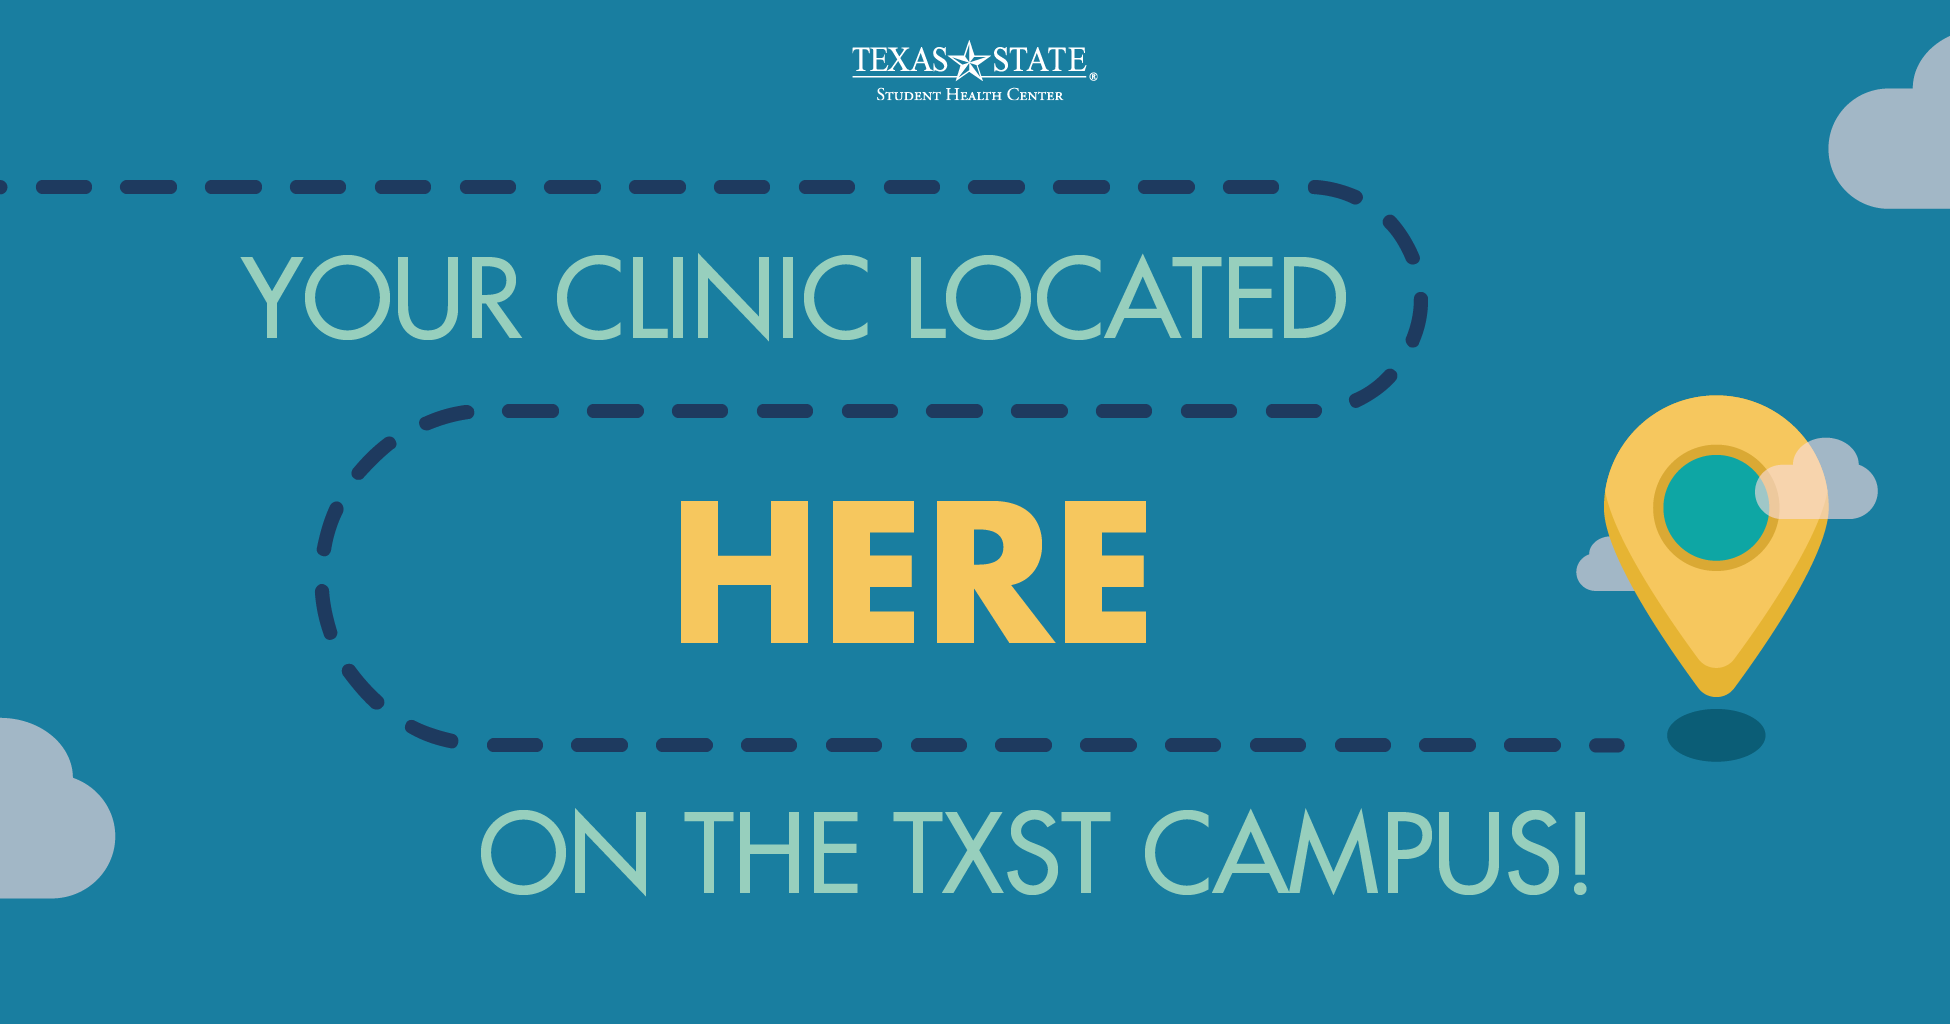 Your clinic located here on campus!